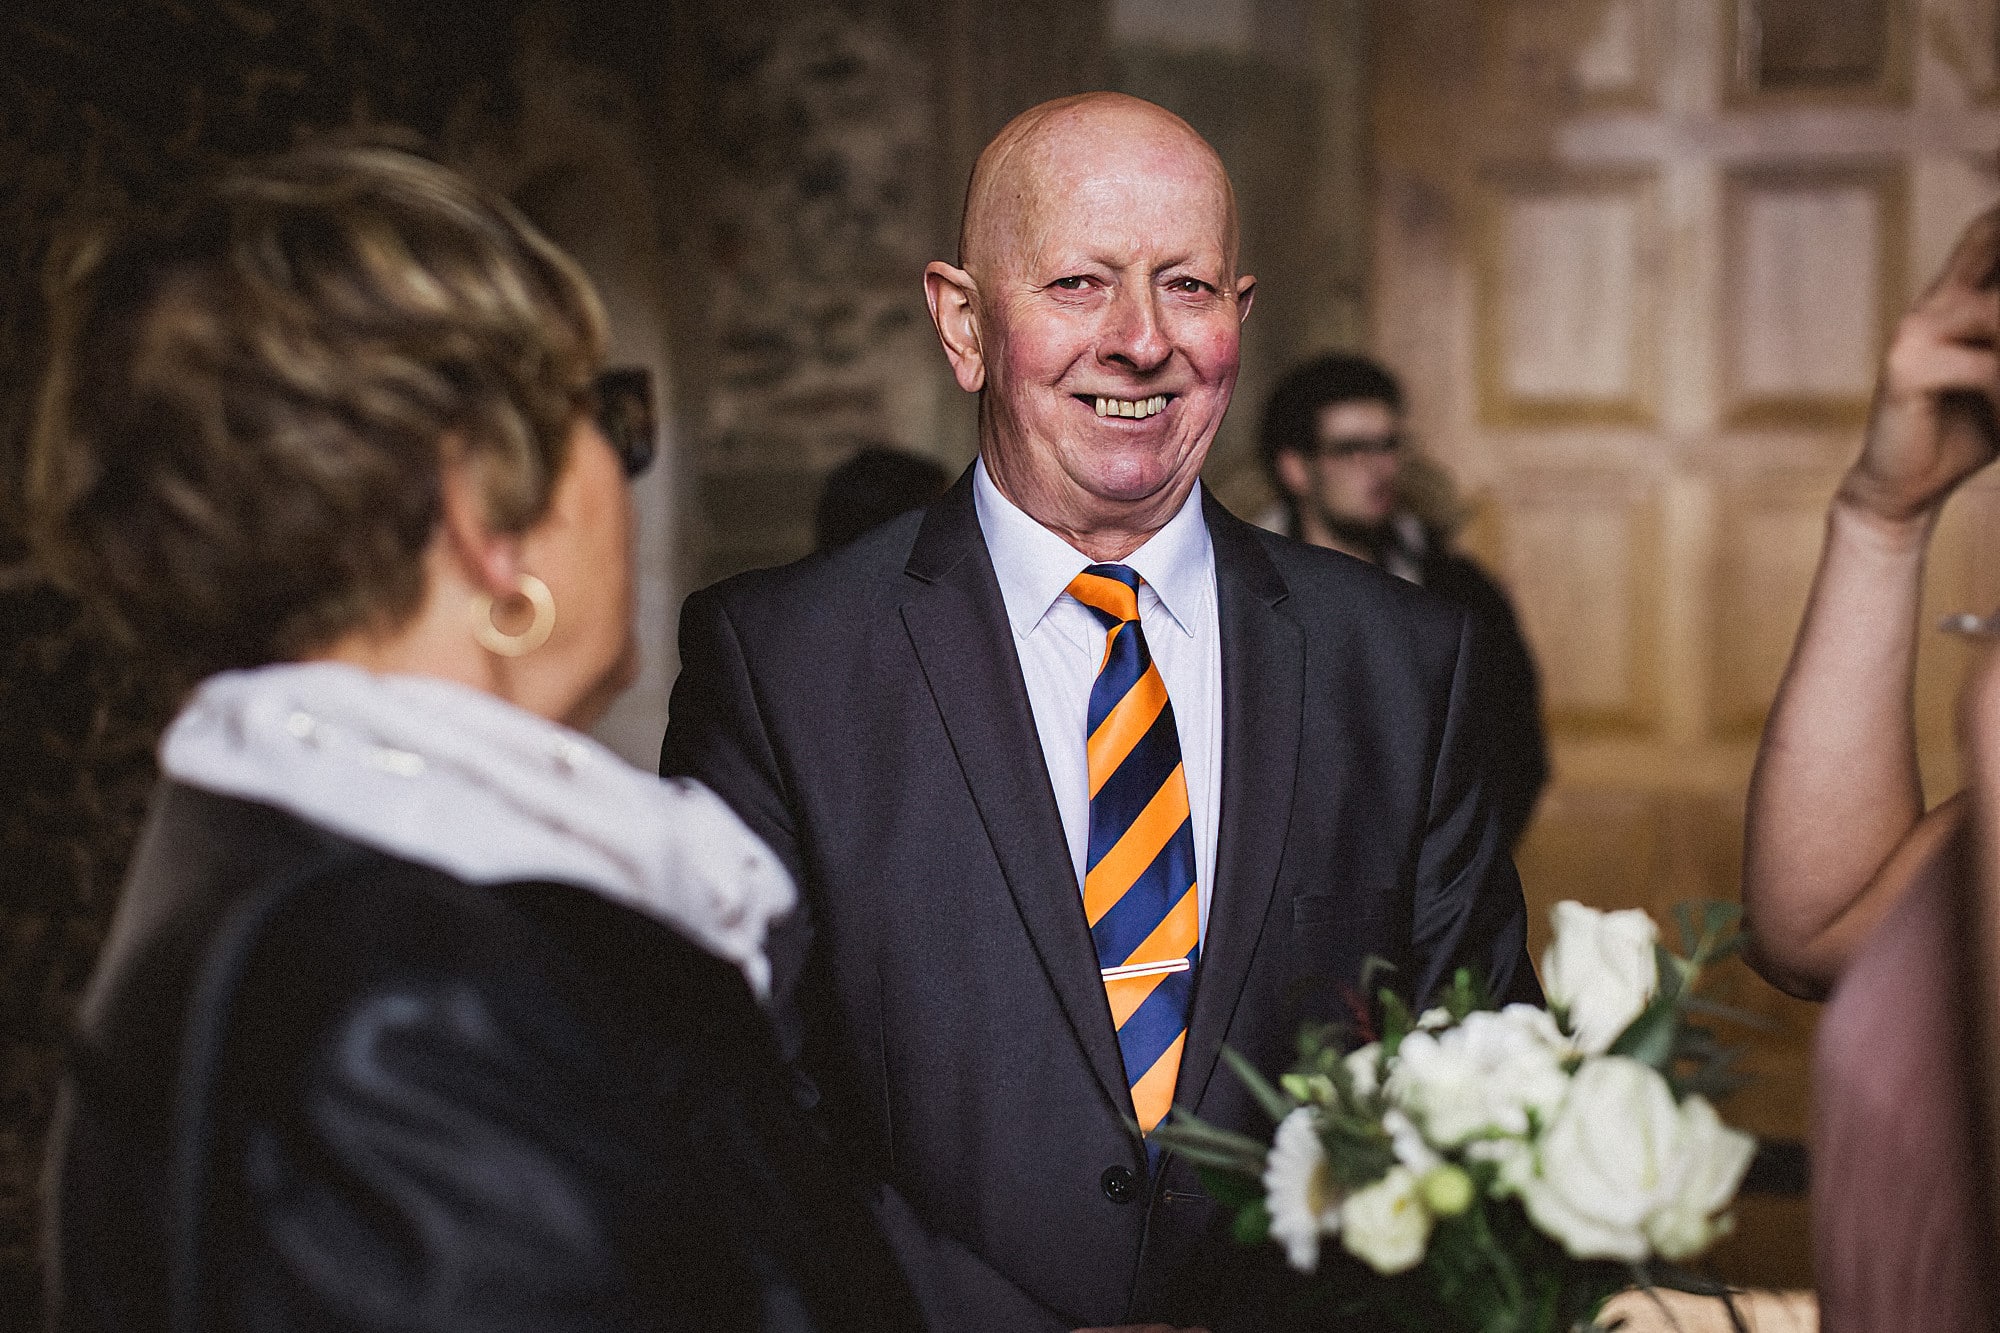 wedding guest laughing at pentney abbey wedding reception